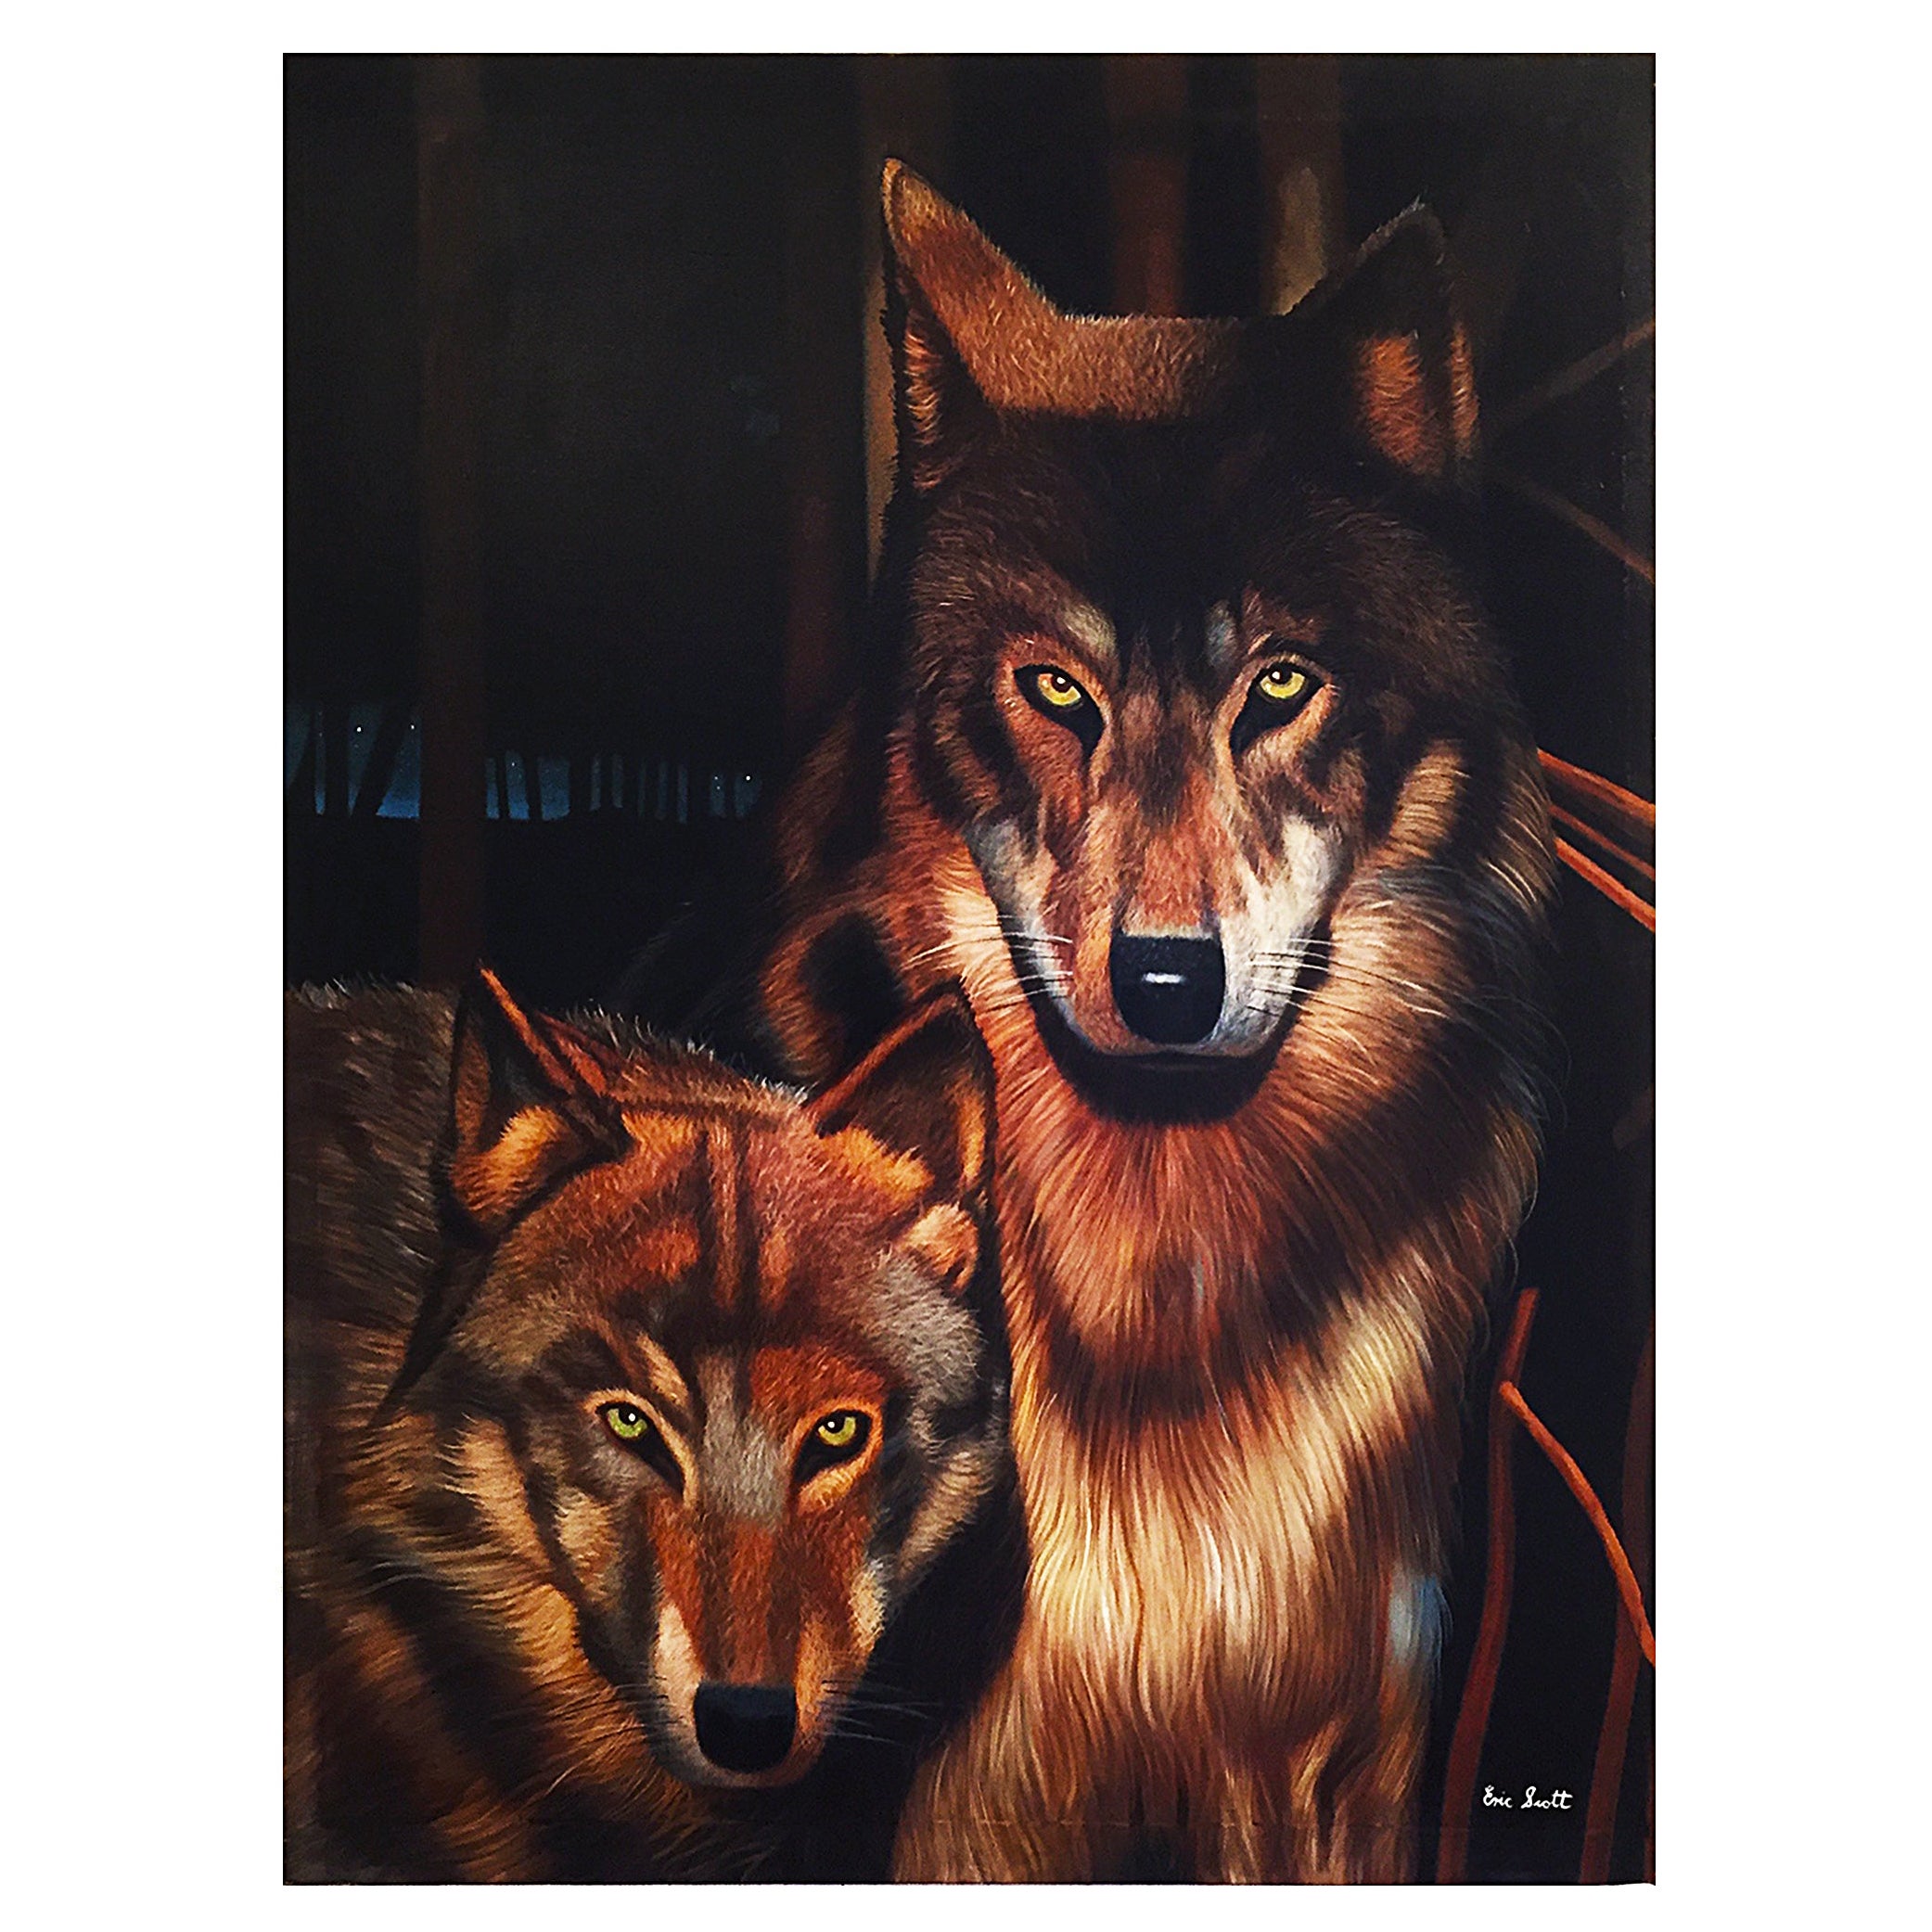 Wolves Painting Eric Scott Oil on Canvas 1980s Art Artwork Animals Realism